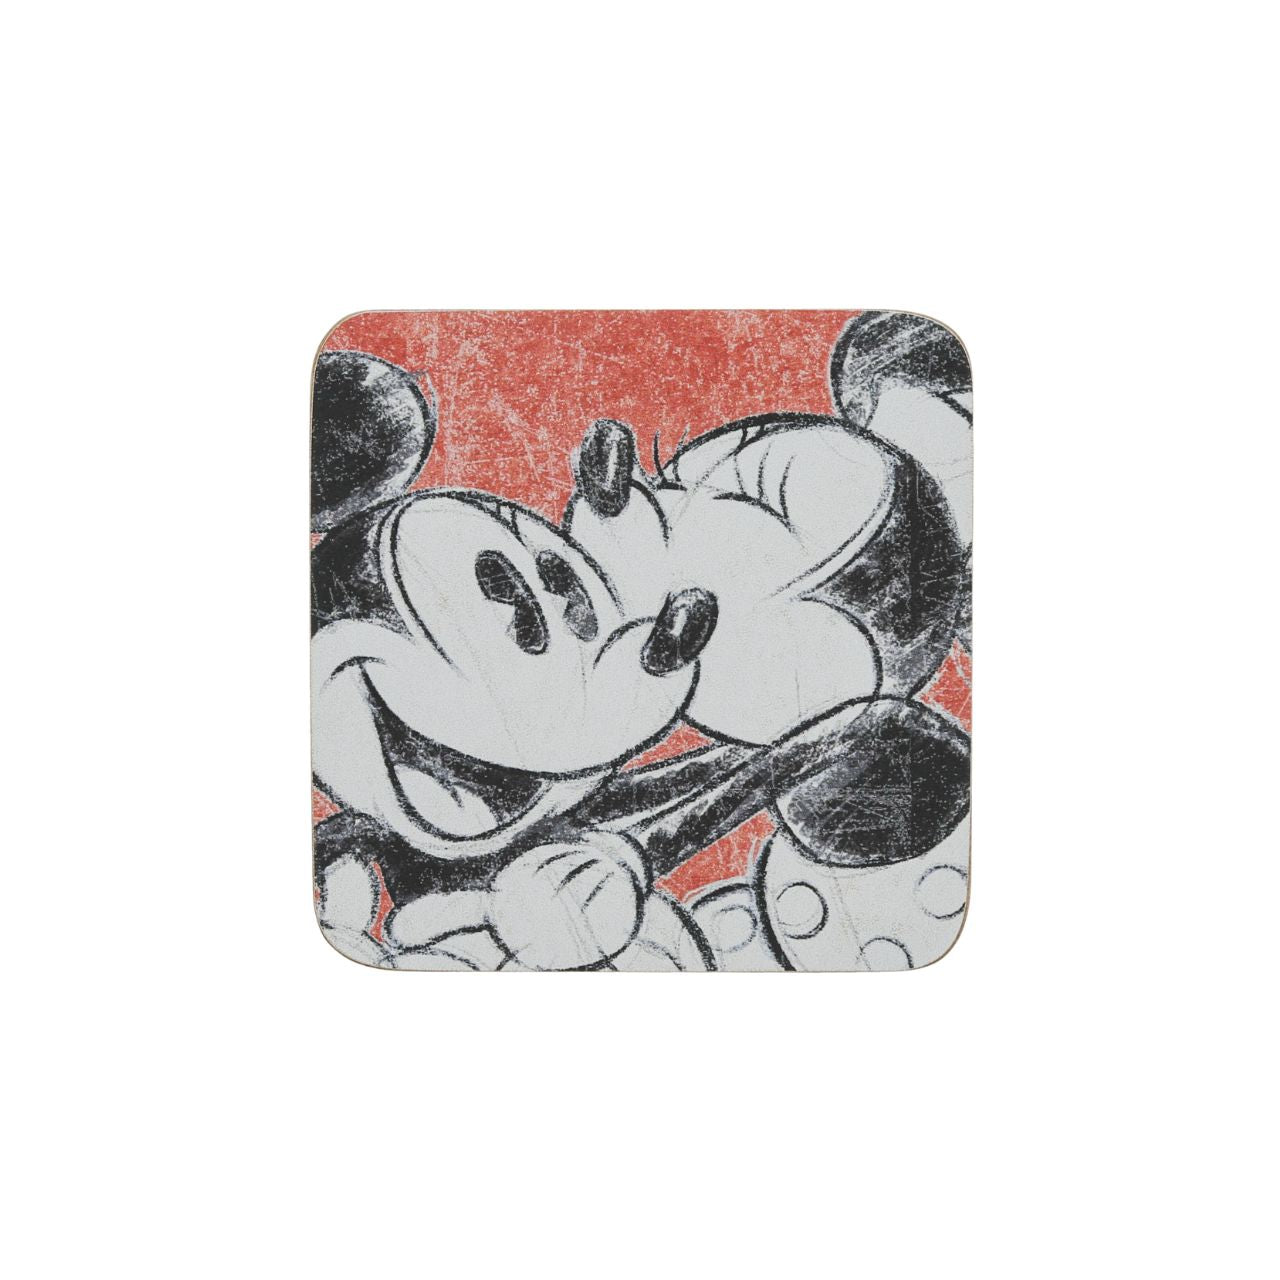 These Mickey and Minnie Mouse Coasters are the perfect addition to any home. Crafted from high-quality melamine, the set of 4 coasters are designed to last. The iconic Mickey and Minnie Mouse designs add a touch of Disney magic to your décor and are sure to make your friends and family smile.